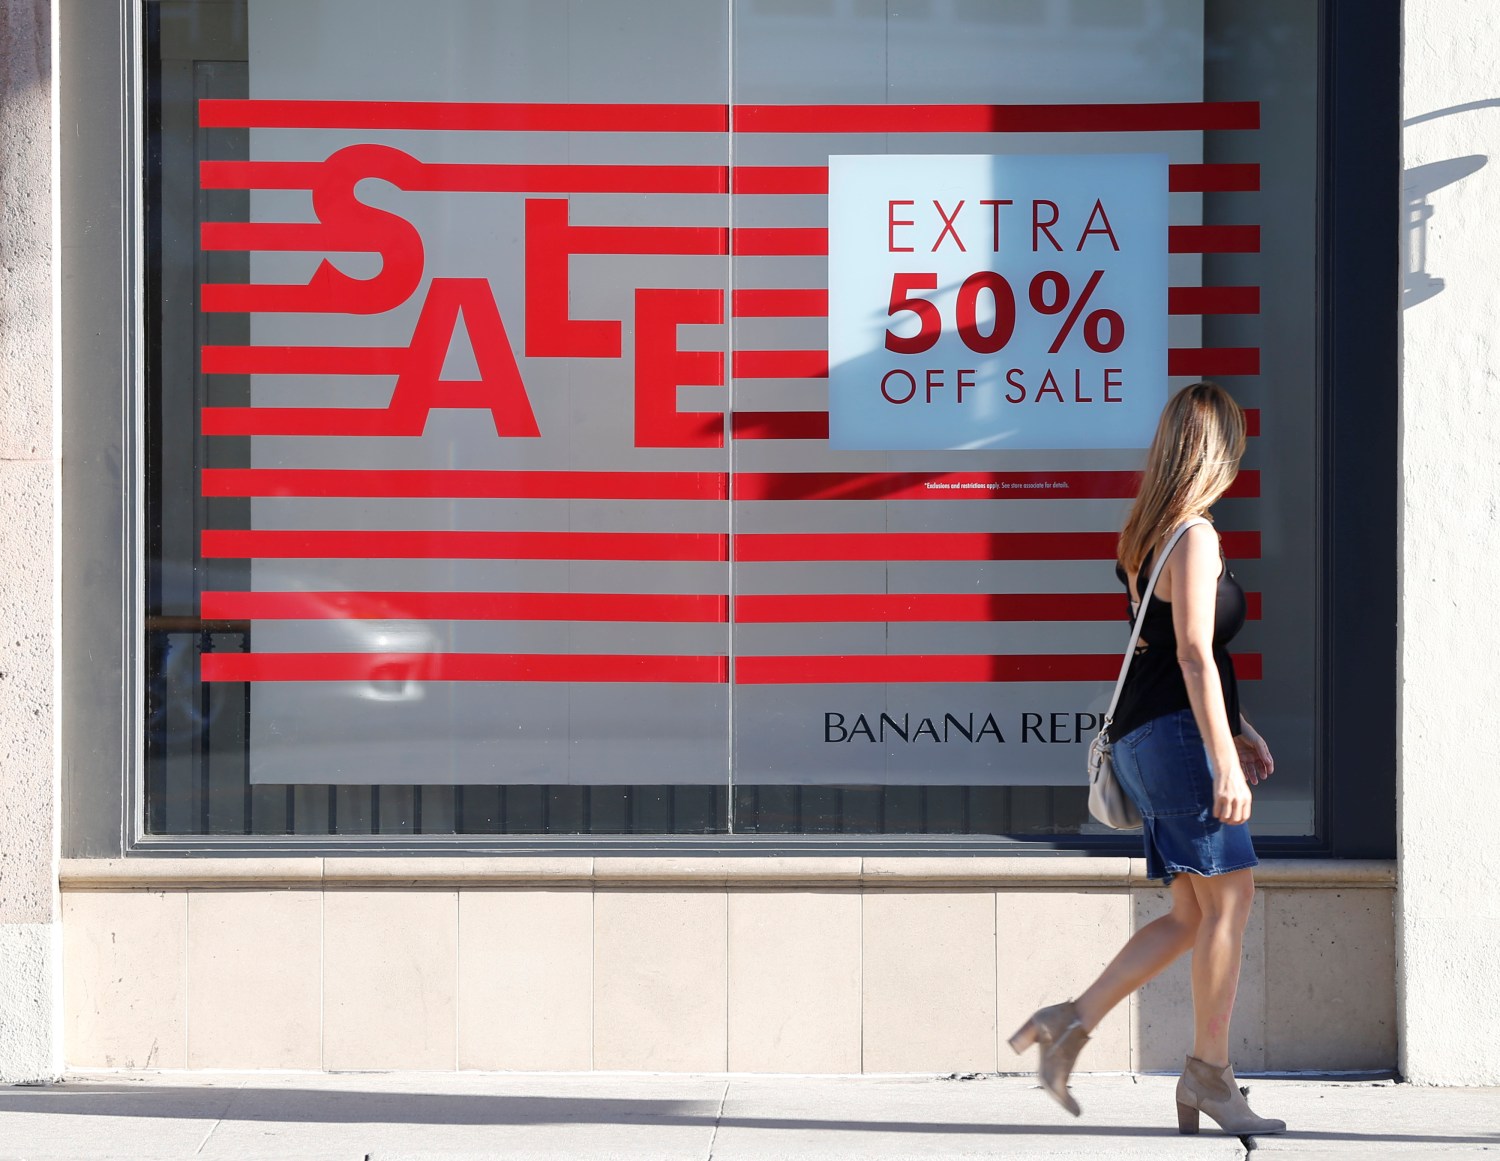 A woman walks past a sign advertising a sale in the Old Town shopping area of Pasadena, California, U.S. June 27, 2017.  REUTERS/Mario Anzuoni - RC16547F38A0